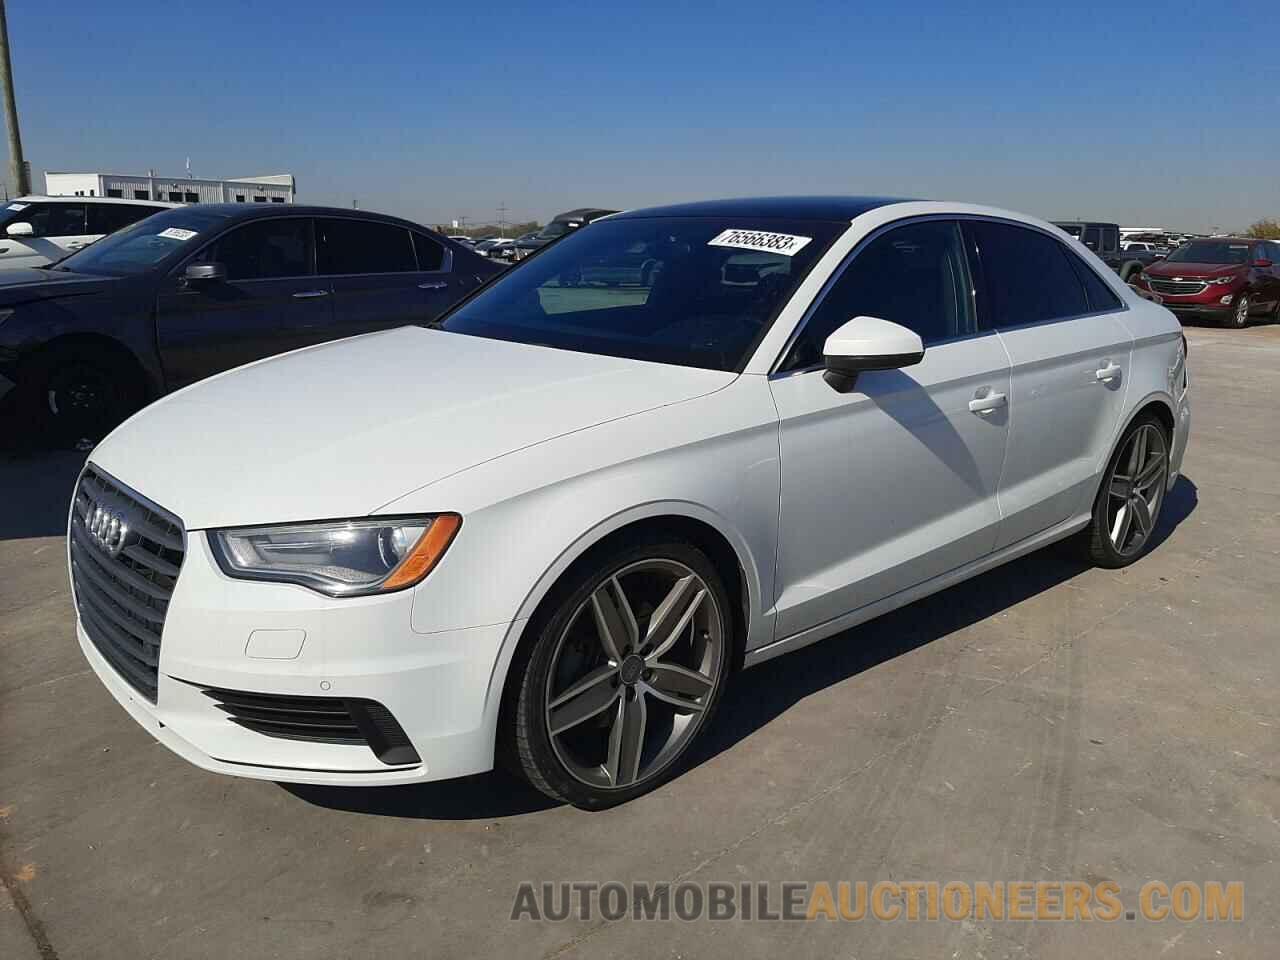 WAUCCGFFXF1116248 AUDI A3 2015